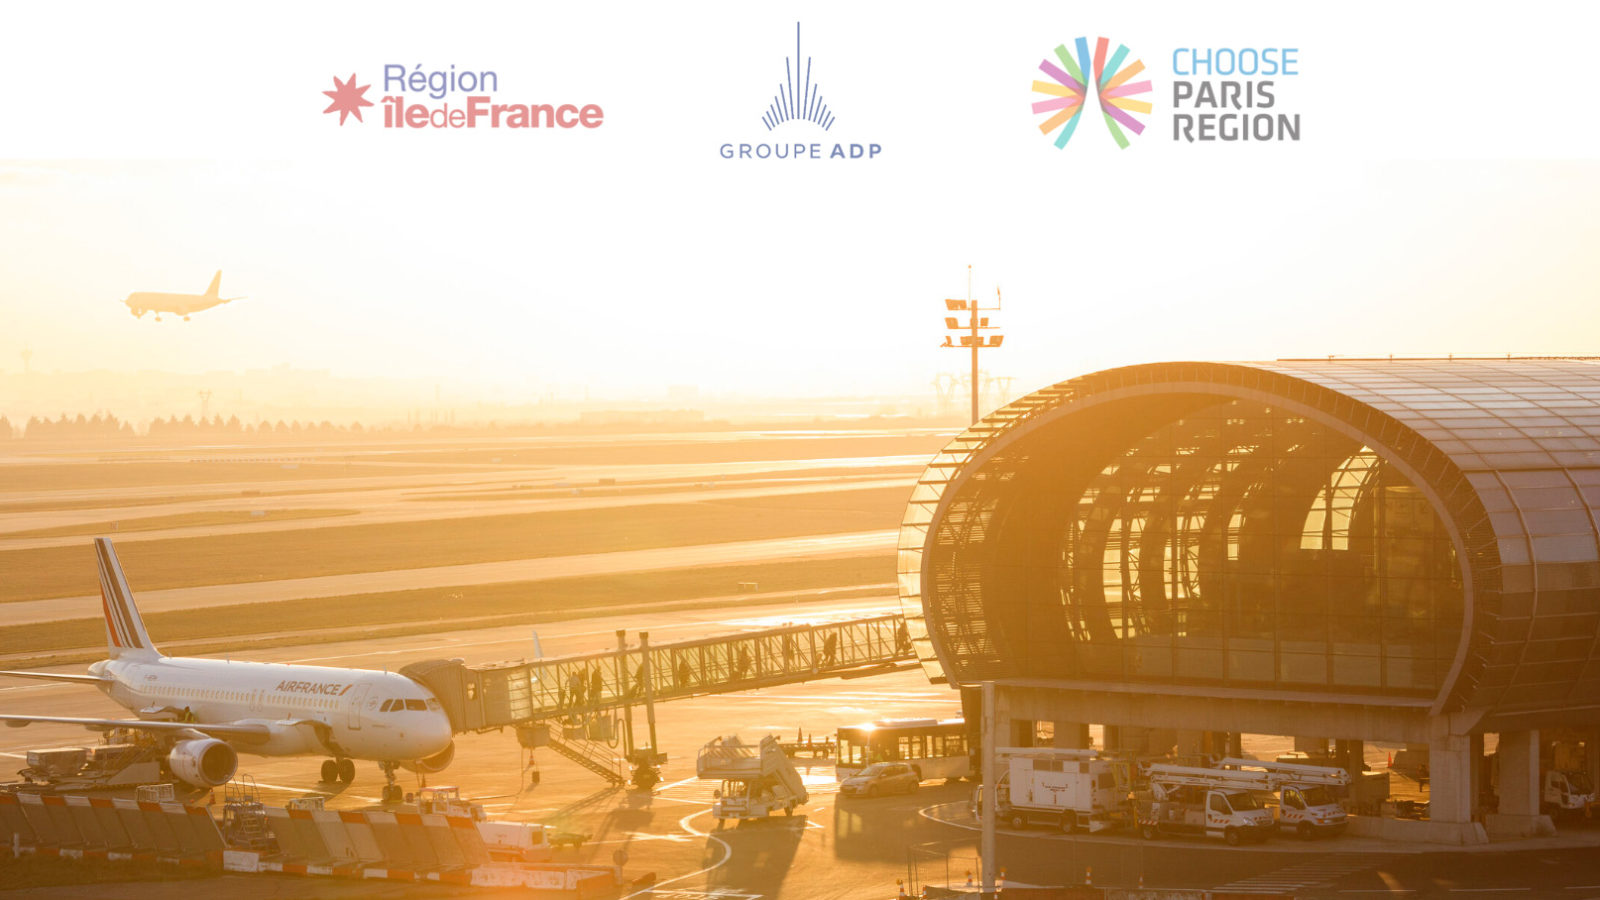 The  Safe Travel Challenge  Call for Applications  Grand Final   Groupe ADP and Choose Paris Region Announce the Winners